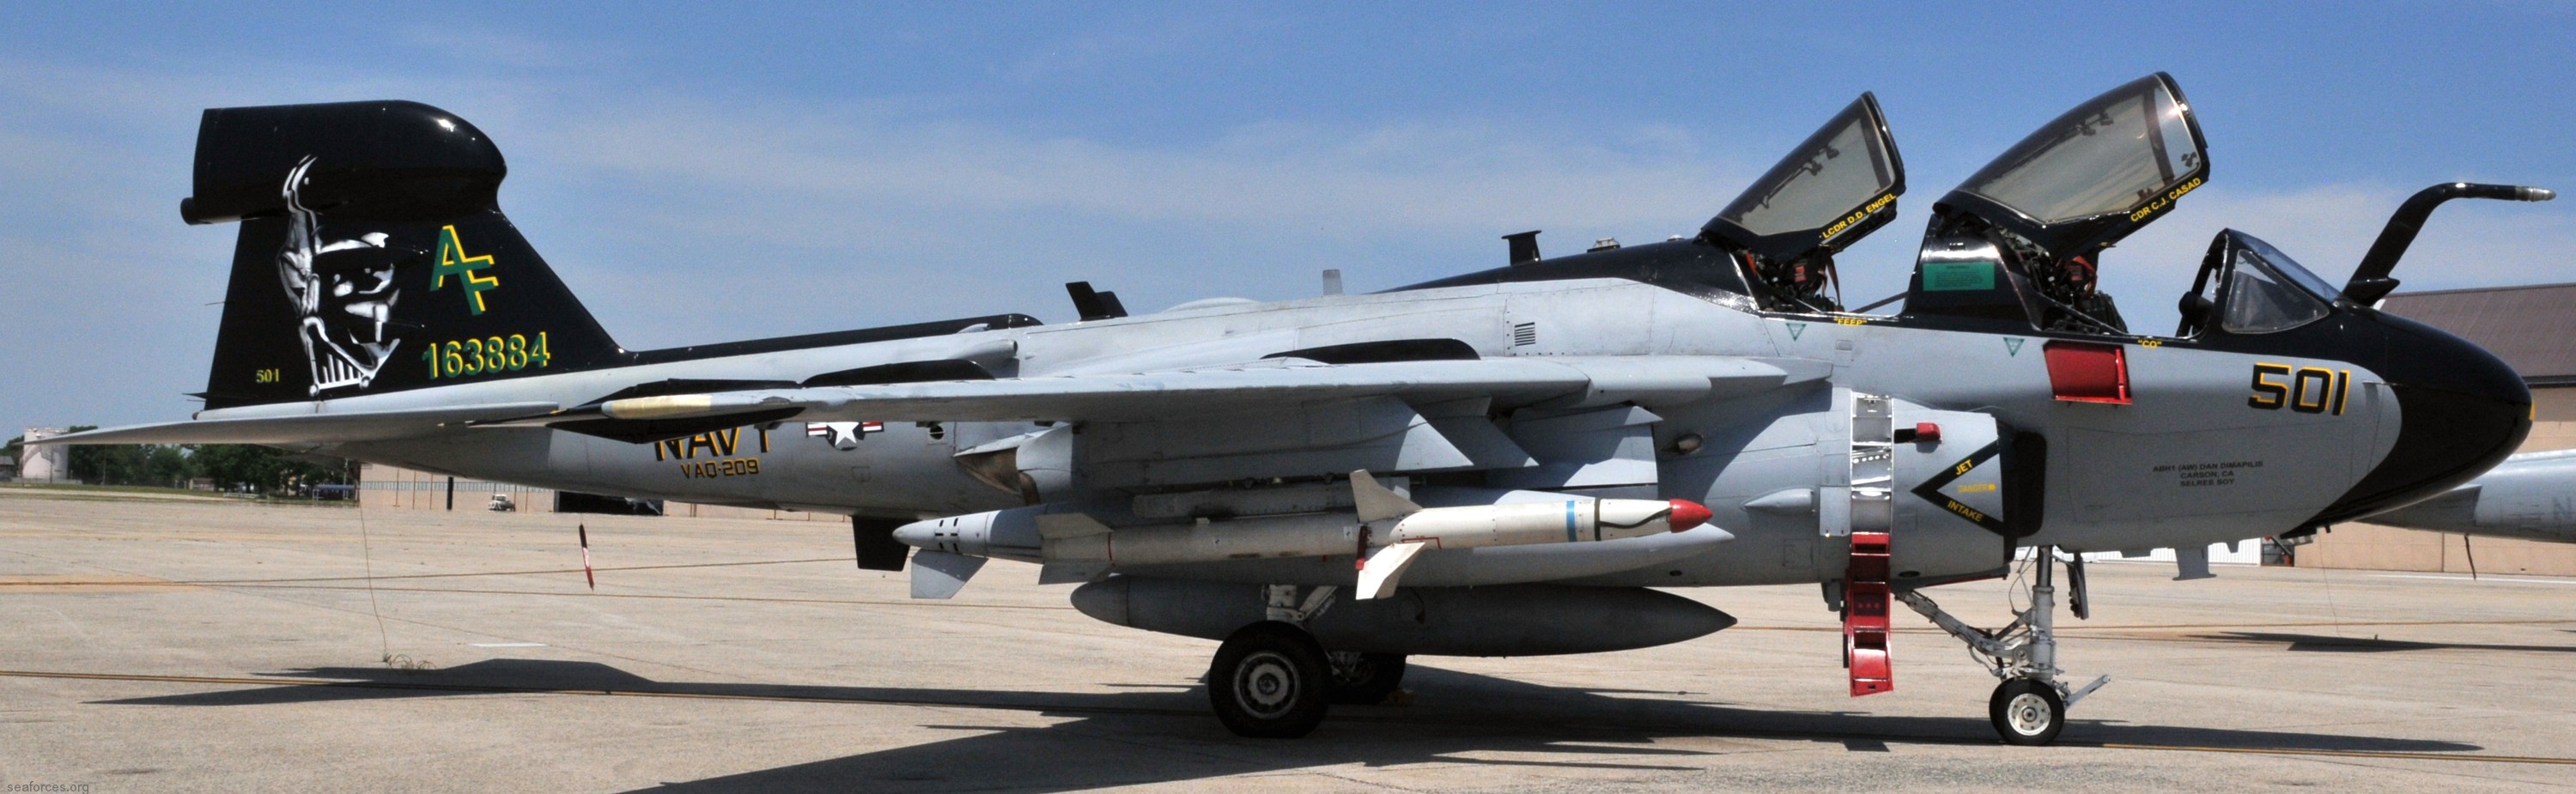 vaq-209 star warriors electronic attack squadron navy ea-6b prowler 24